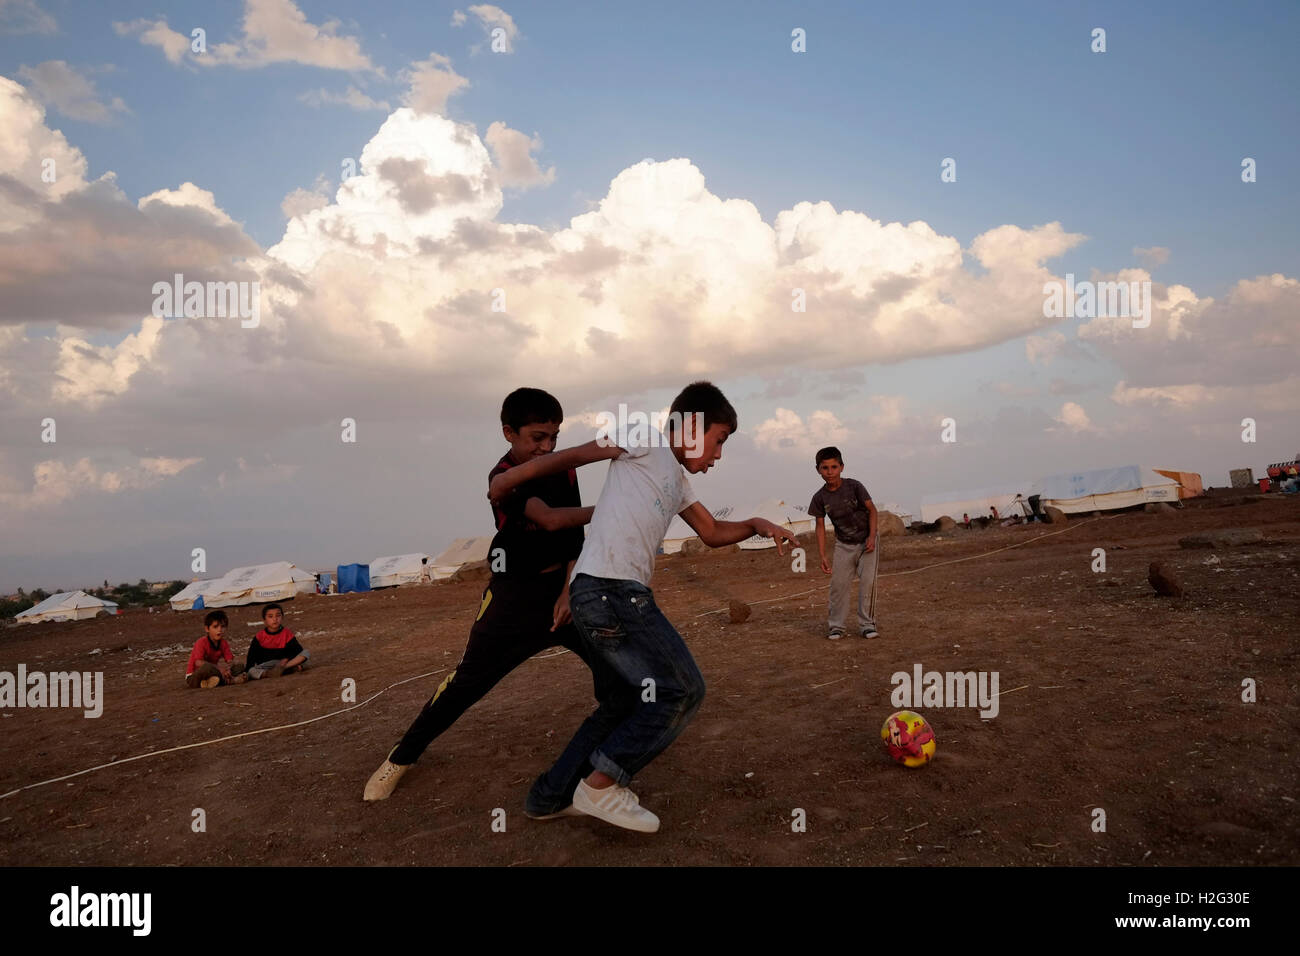 Yazidi children playing football in Nawroz refugee camp which was initially established to shelter Syrians displaced from the ongoing Syrian civil war then occupied by displaced people from the minority Yazidi sect, fleeing the violence in the Iraqi town of Sinjar situated next to the town of al-Malikyah in Rojava autonomous Kurdish region, North Eastern Syria. Stock Photo